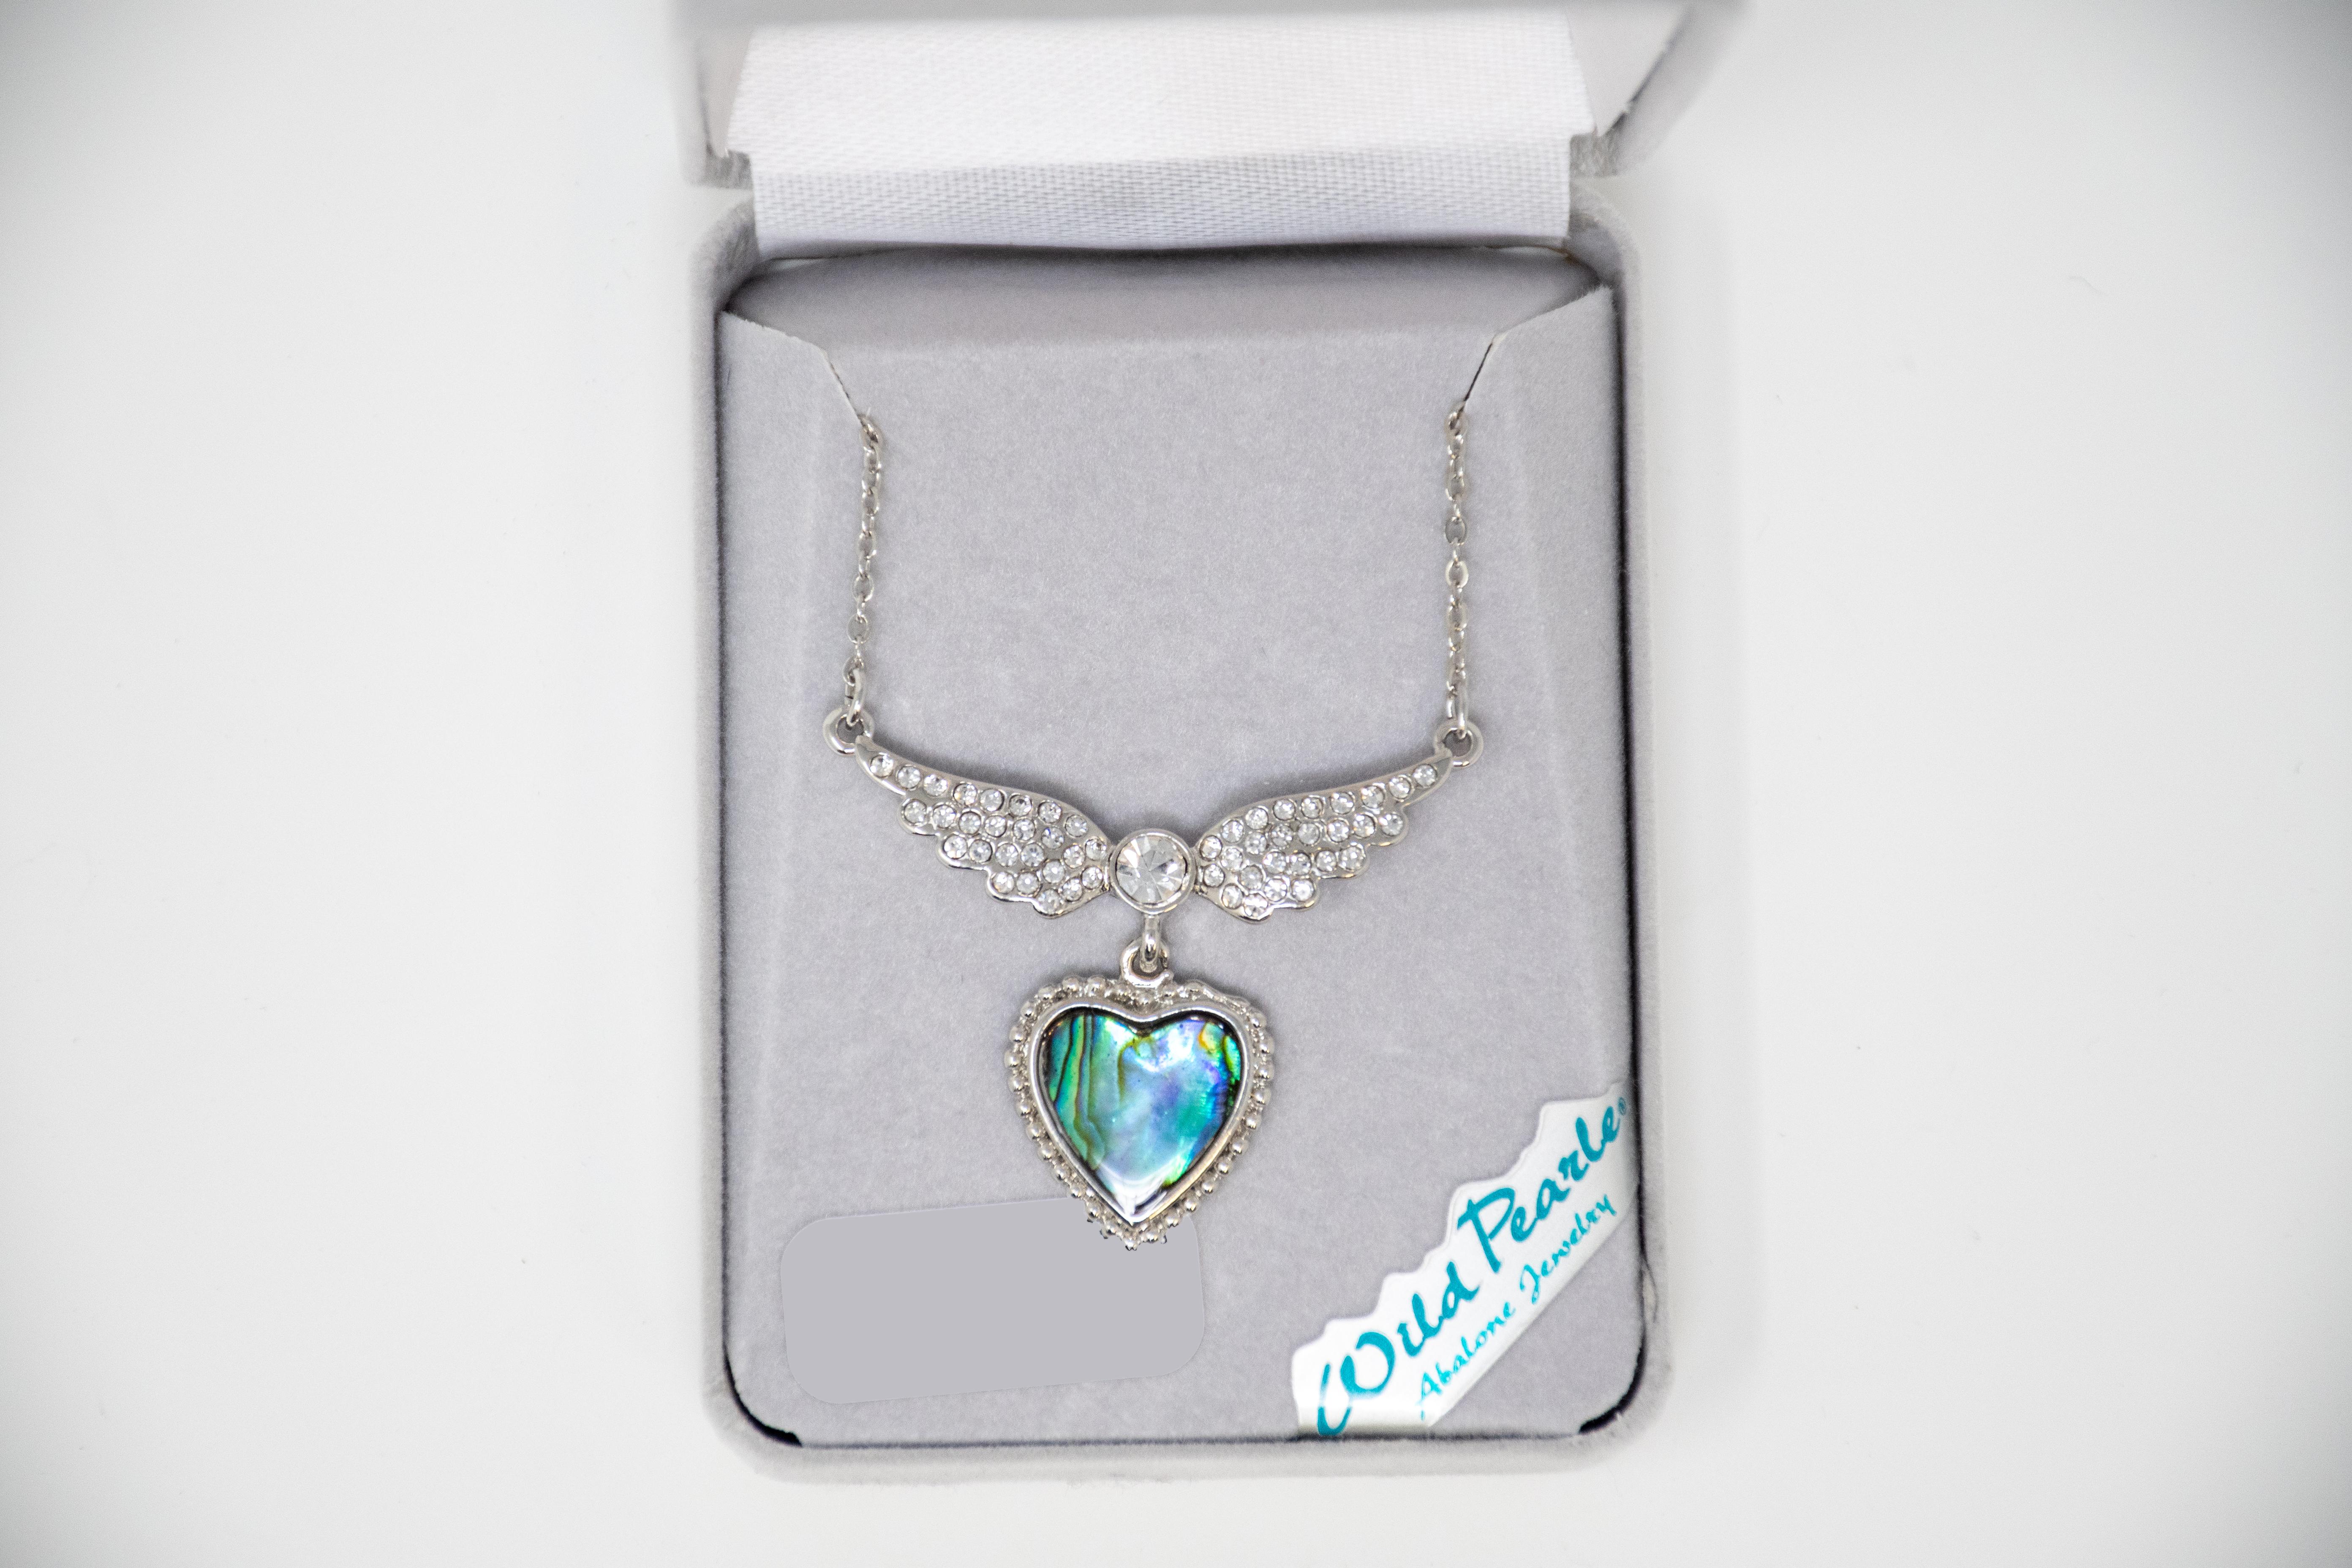  Necklace - Angelic Heart